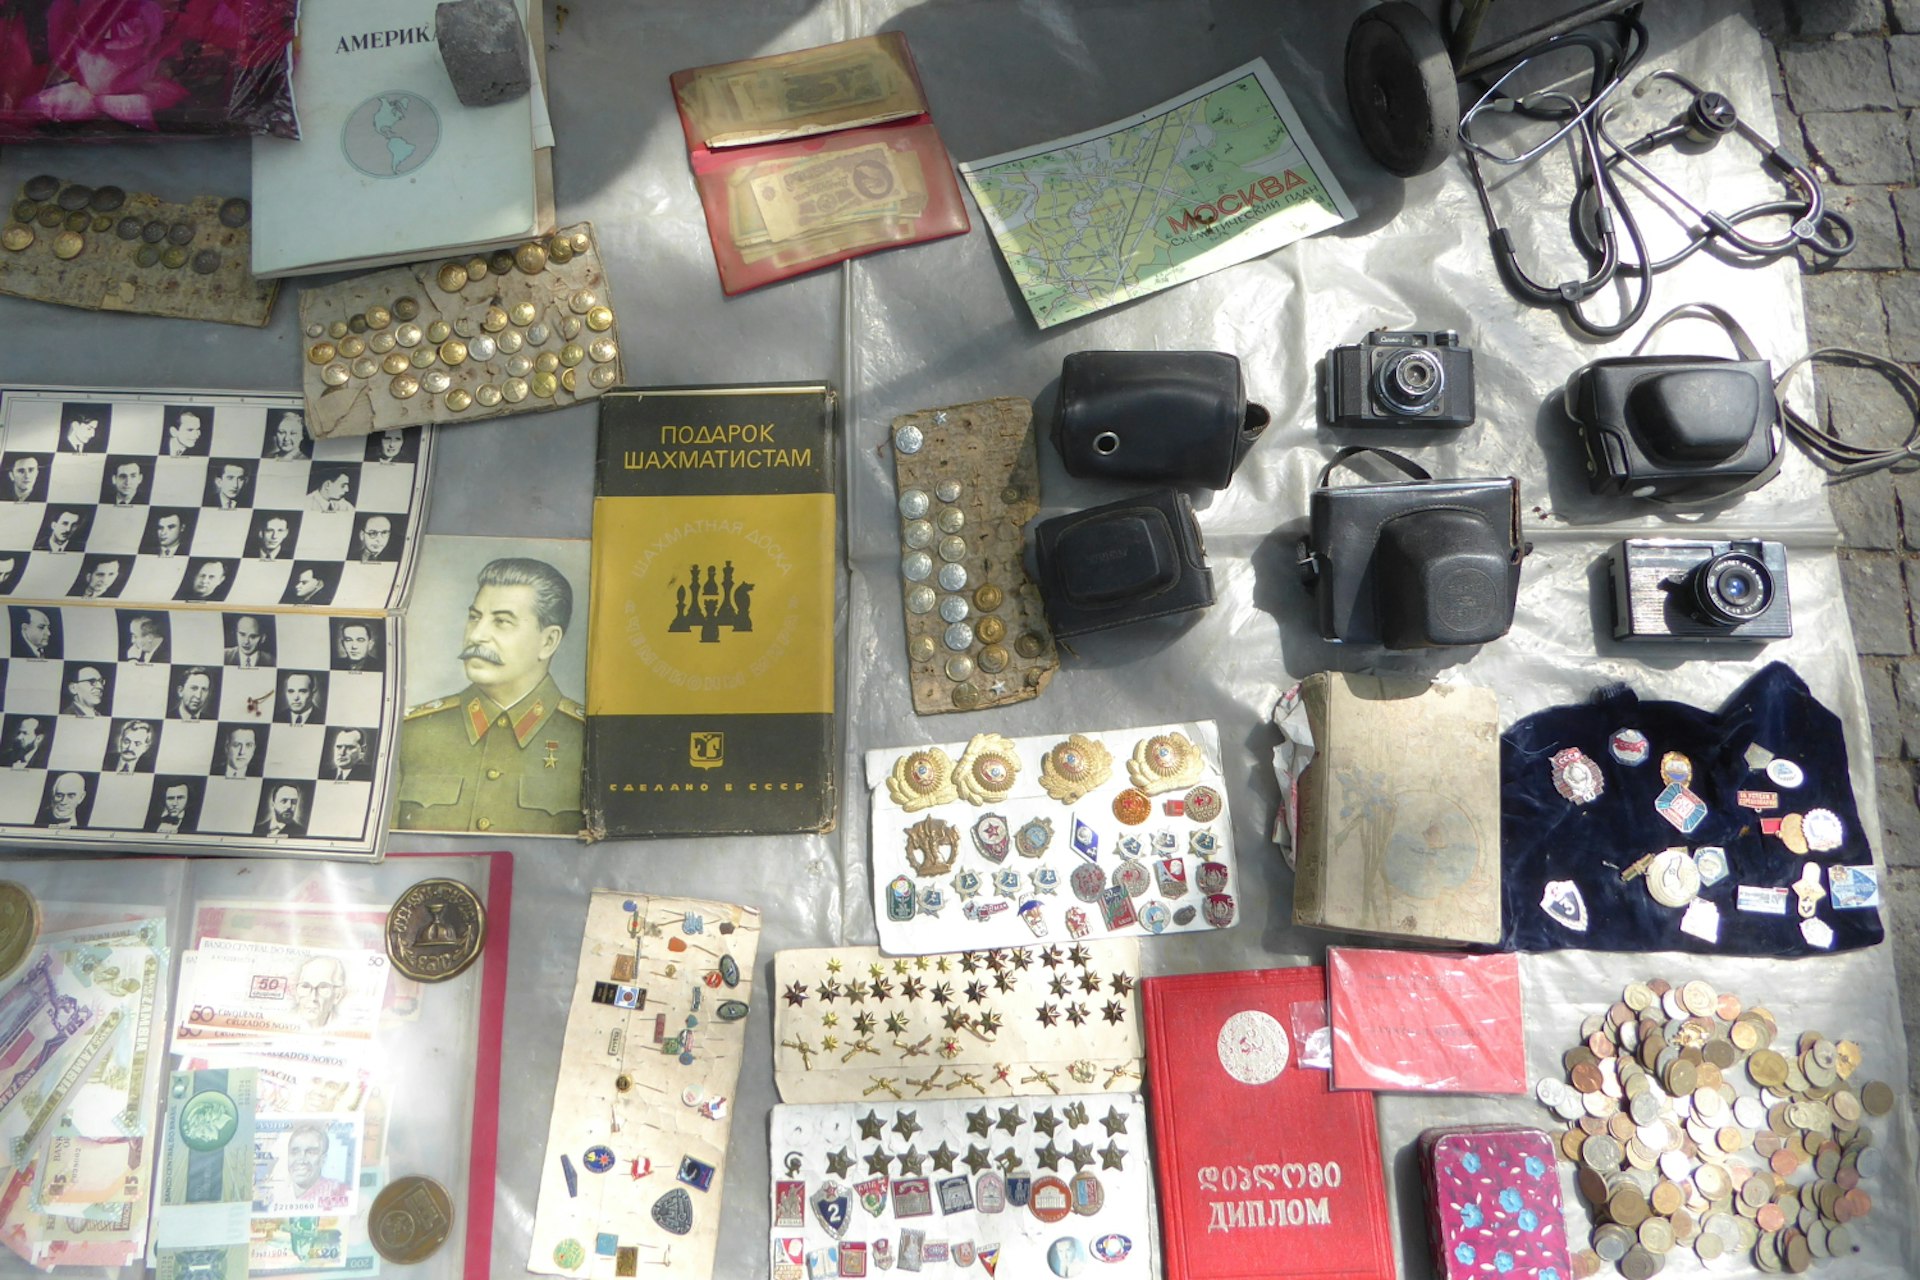 Many different items lay out for sale on a mat at a market, including coins, badges and books from the Soviet era